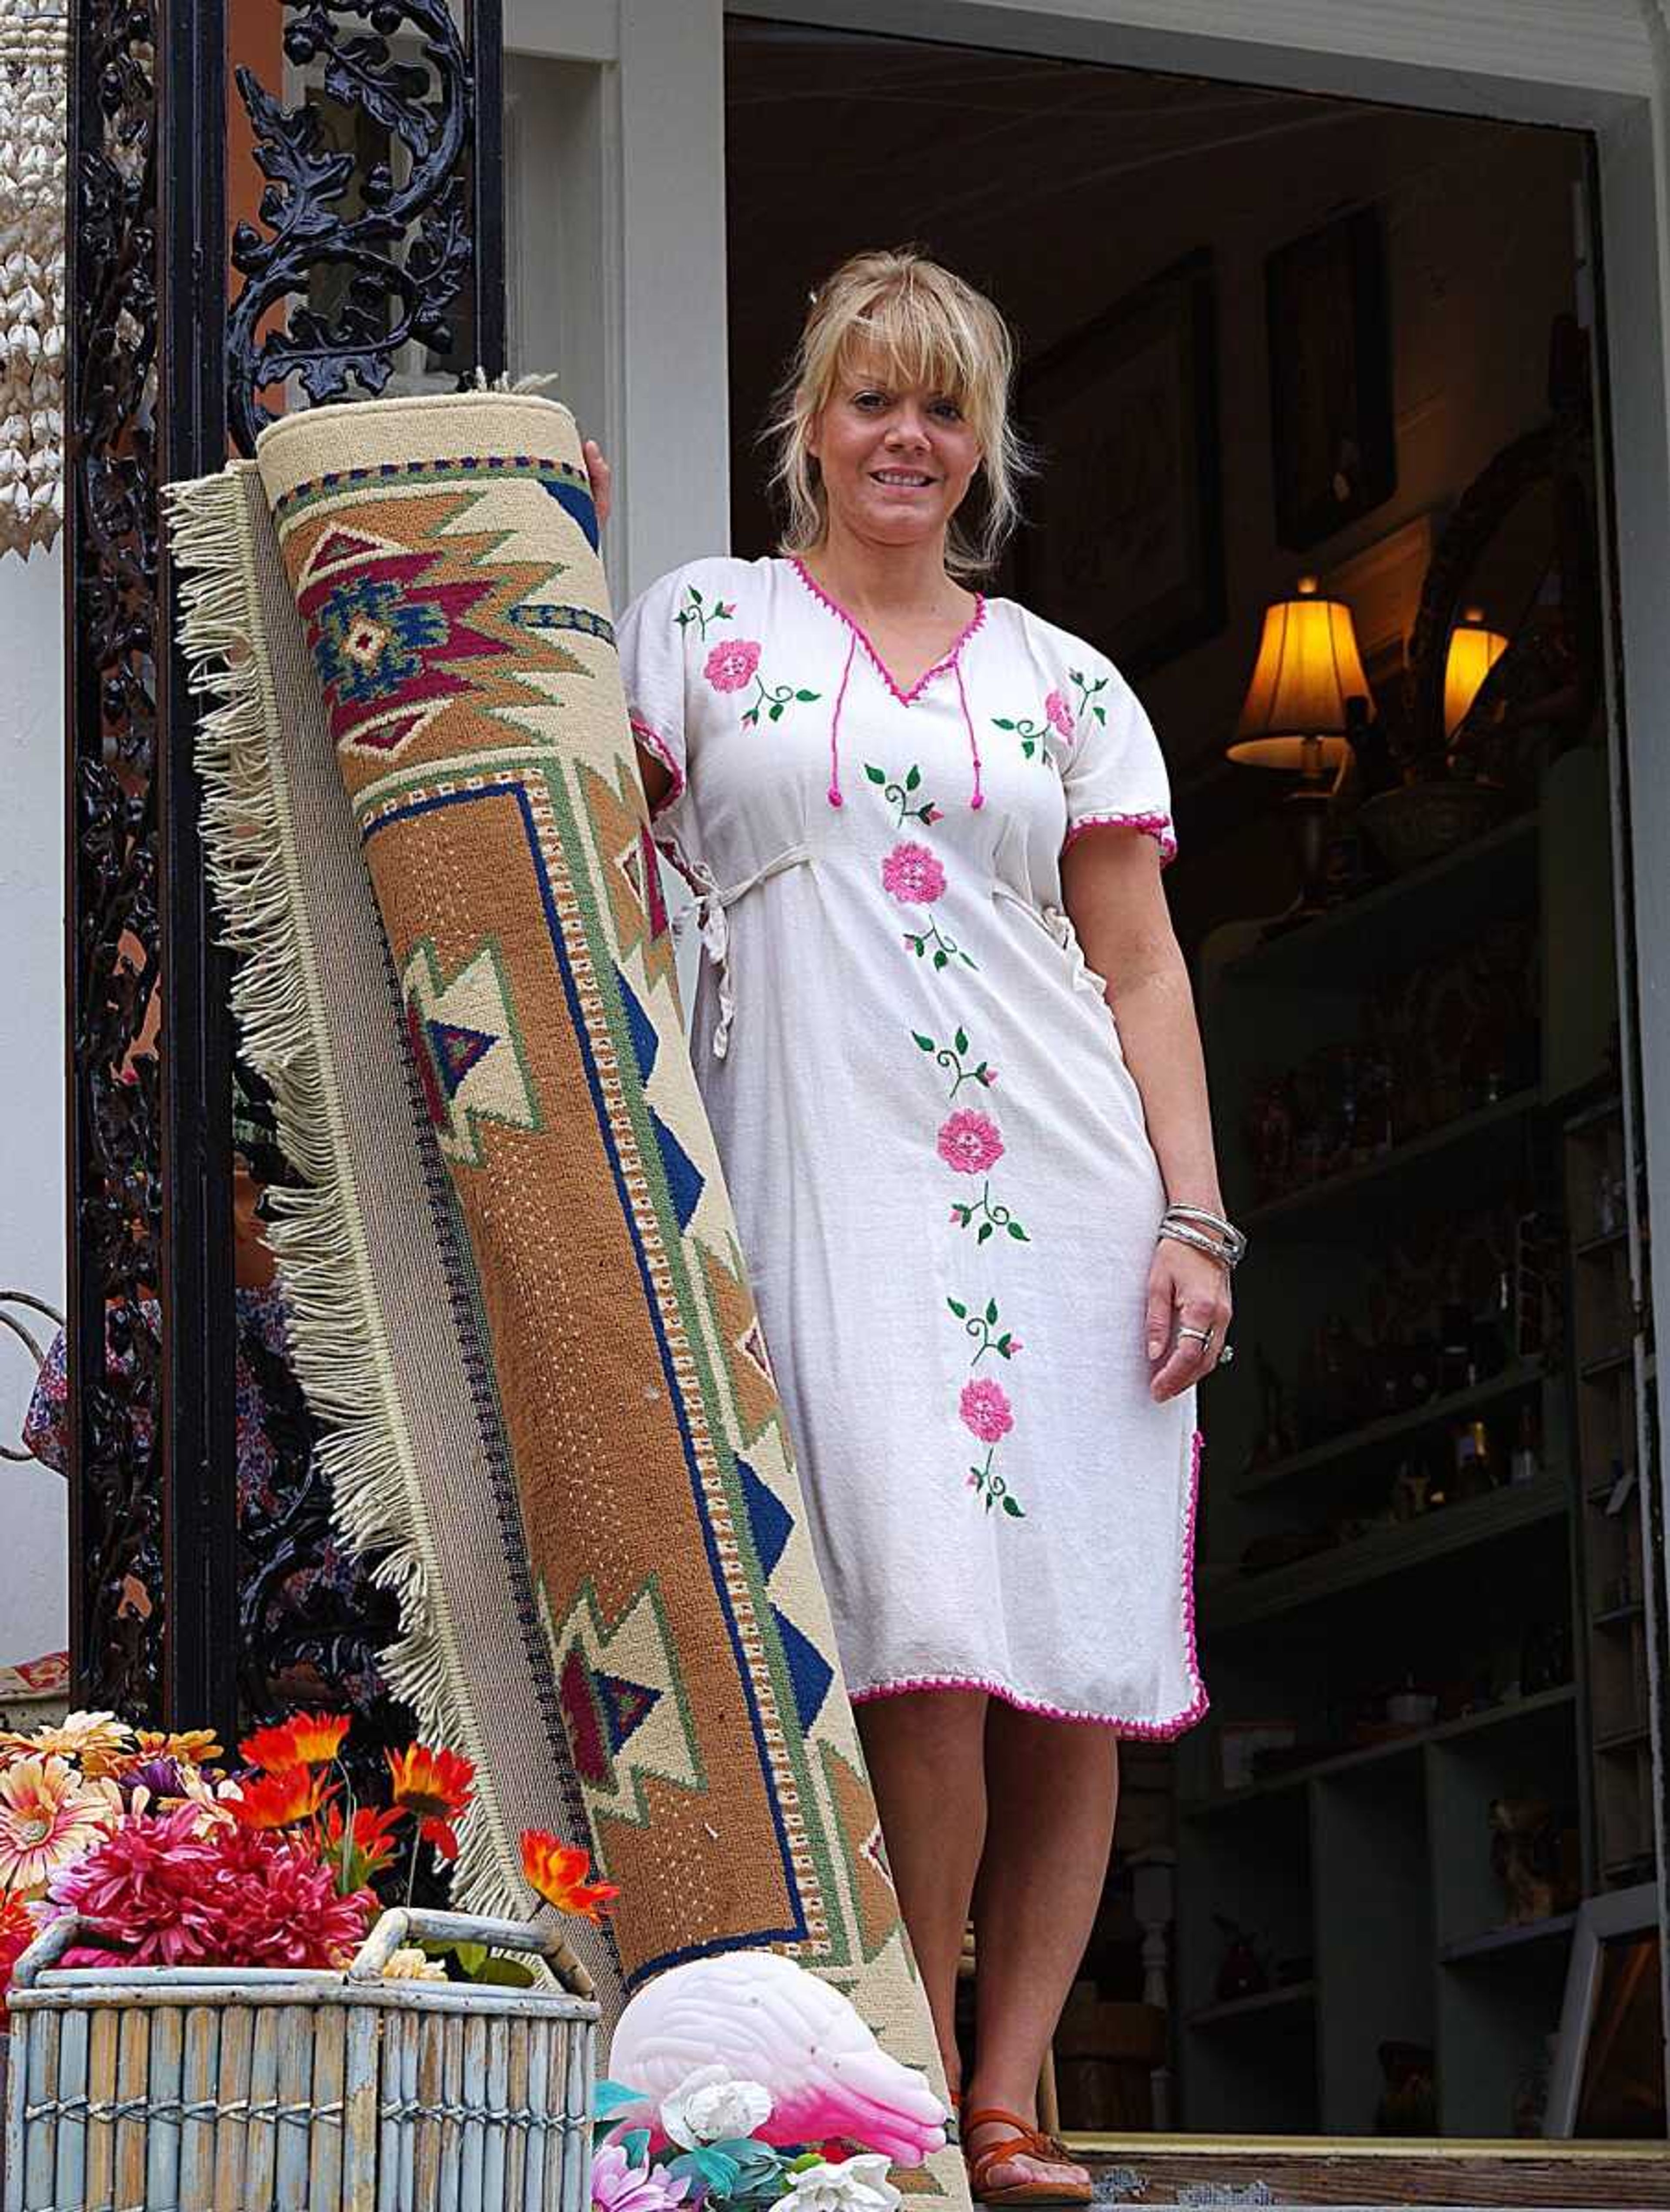 Laurie Everett brings out antiques to put on display before she opens the store for the day. Photo by Nathan Hamilton